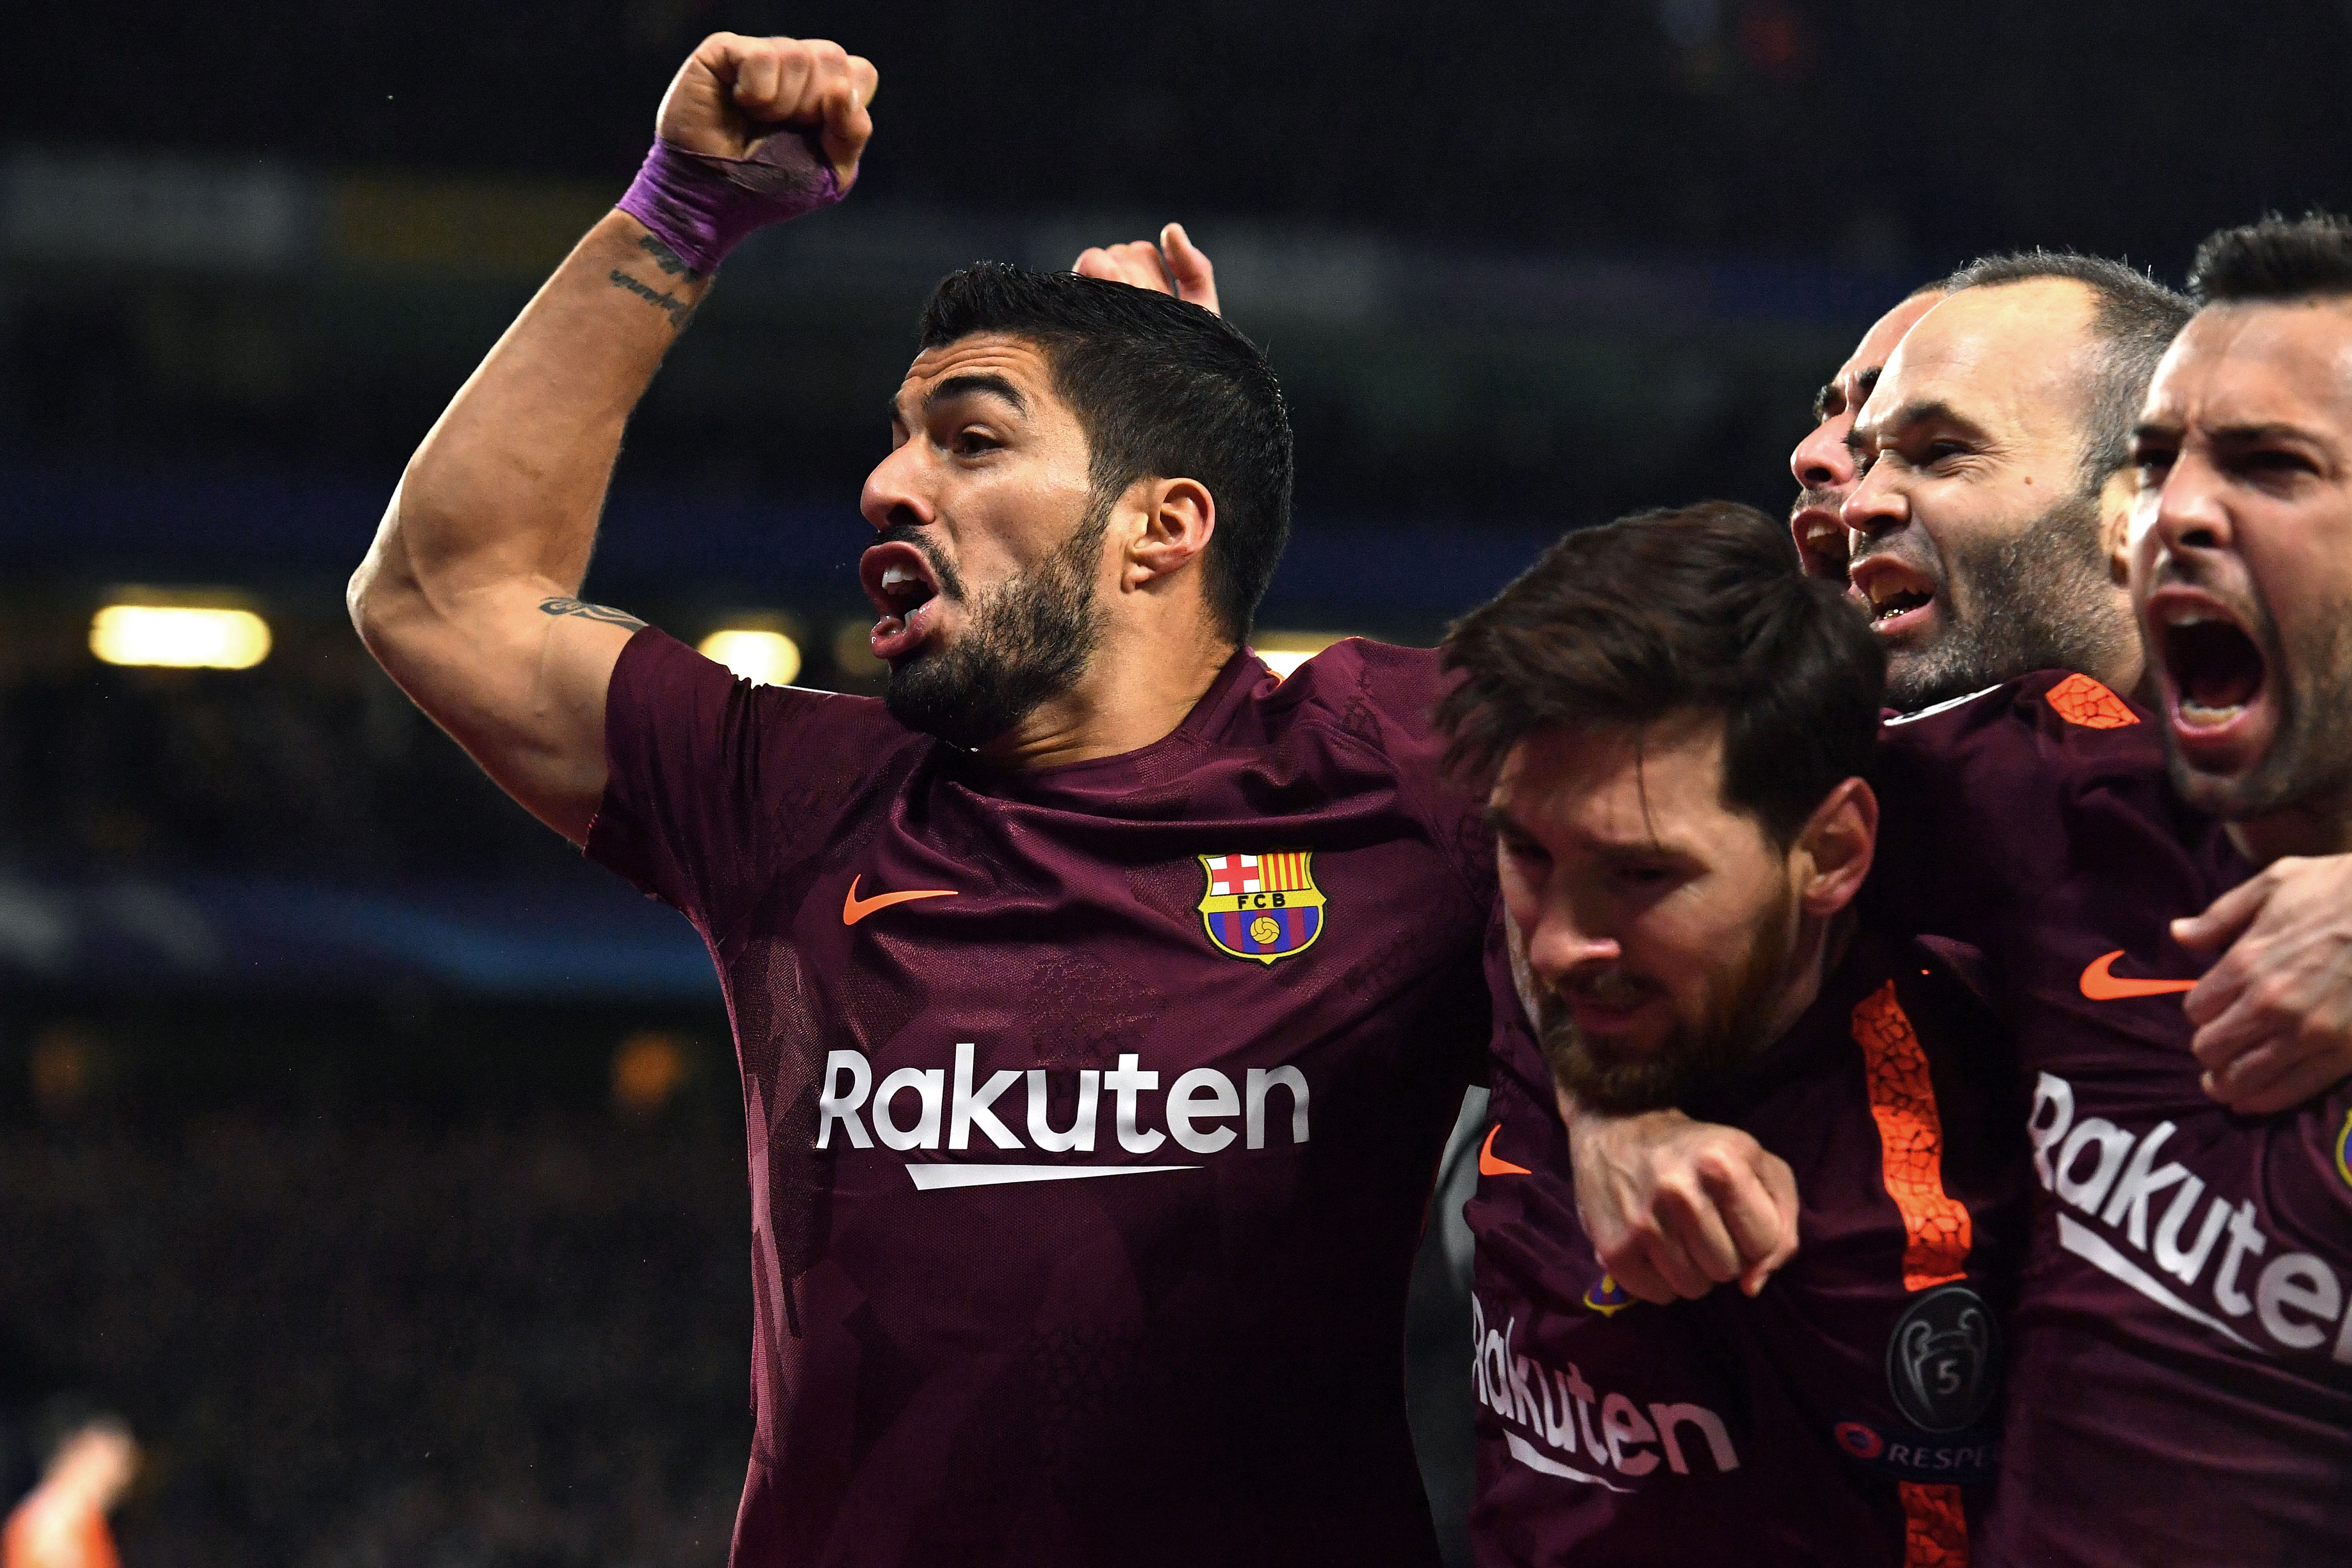 TOPSHOT - Barcelona's Argentinian striker Lionel Messi (C) celebrates with Barcelona's Uruguayan striker Luis Suarez (L) and teammates after scoring their first goal during the first leg of the UEFA Champions League round of 16 football match between Chelsea and Barcelona at Stamford Bridge stadium in London on February 20, 2018. / AFP PHOTO / Ben STANSALL        (Photo credit should read BEN STANSALL/AFP/Getty Images)